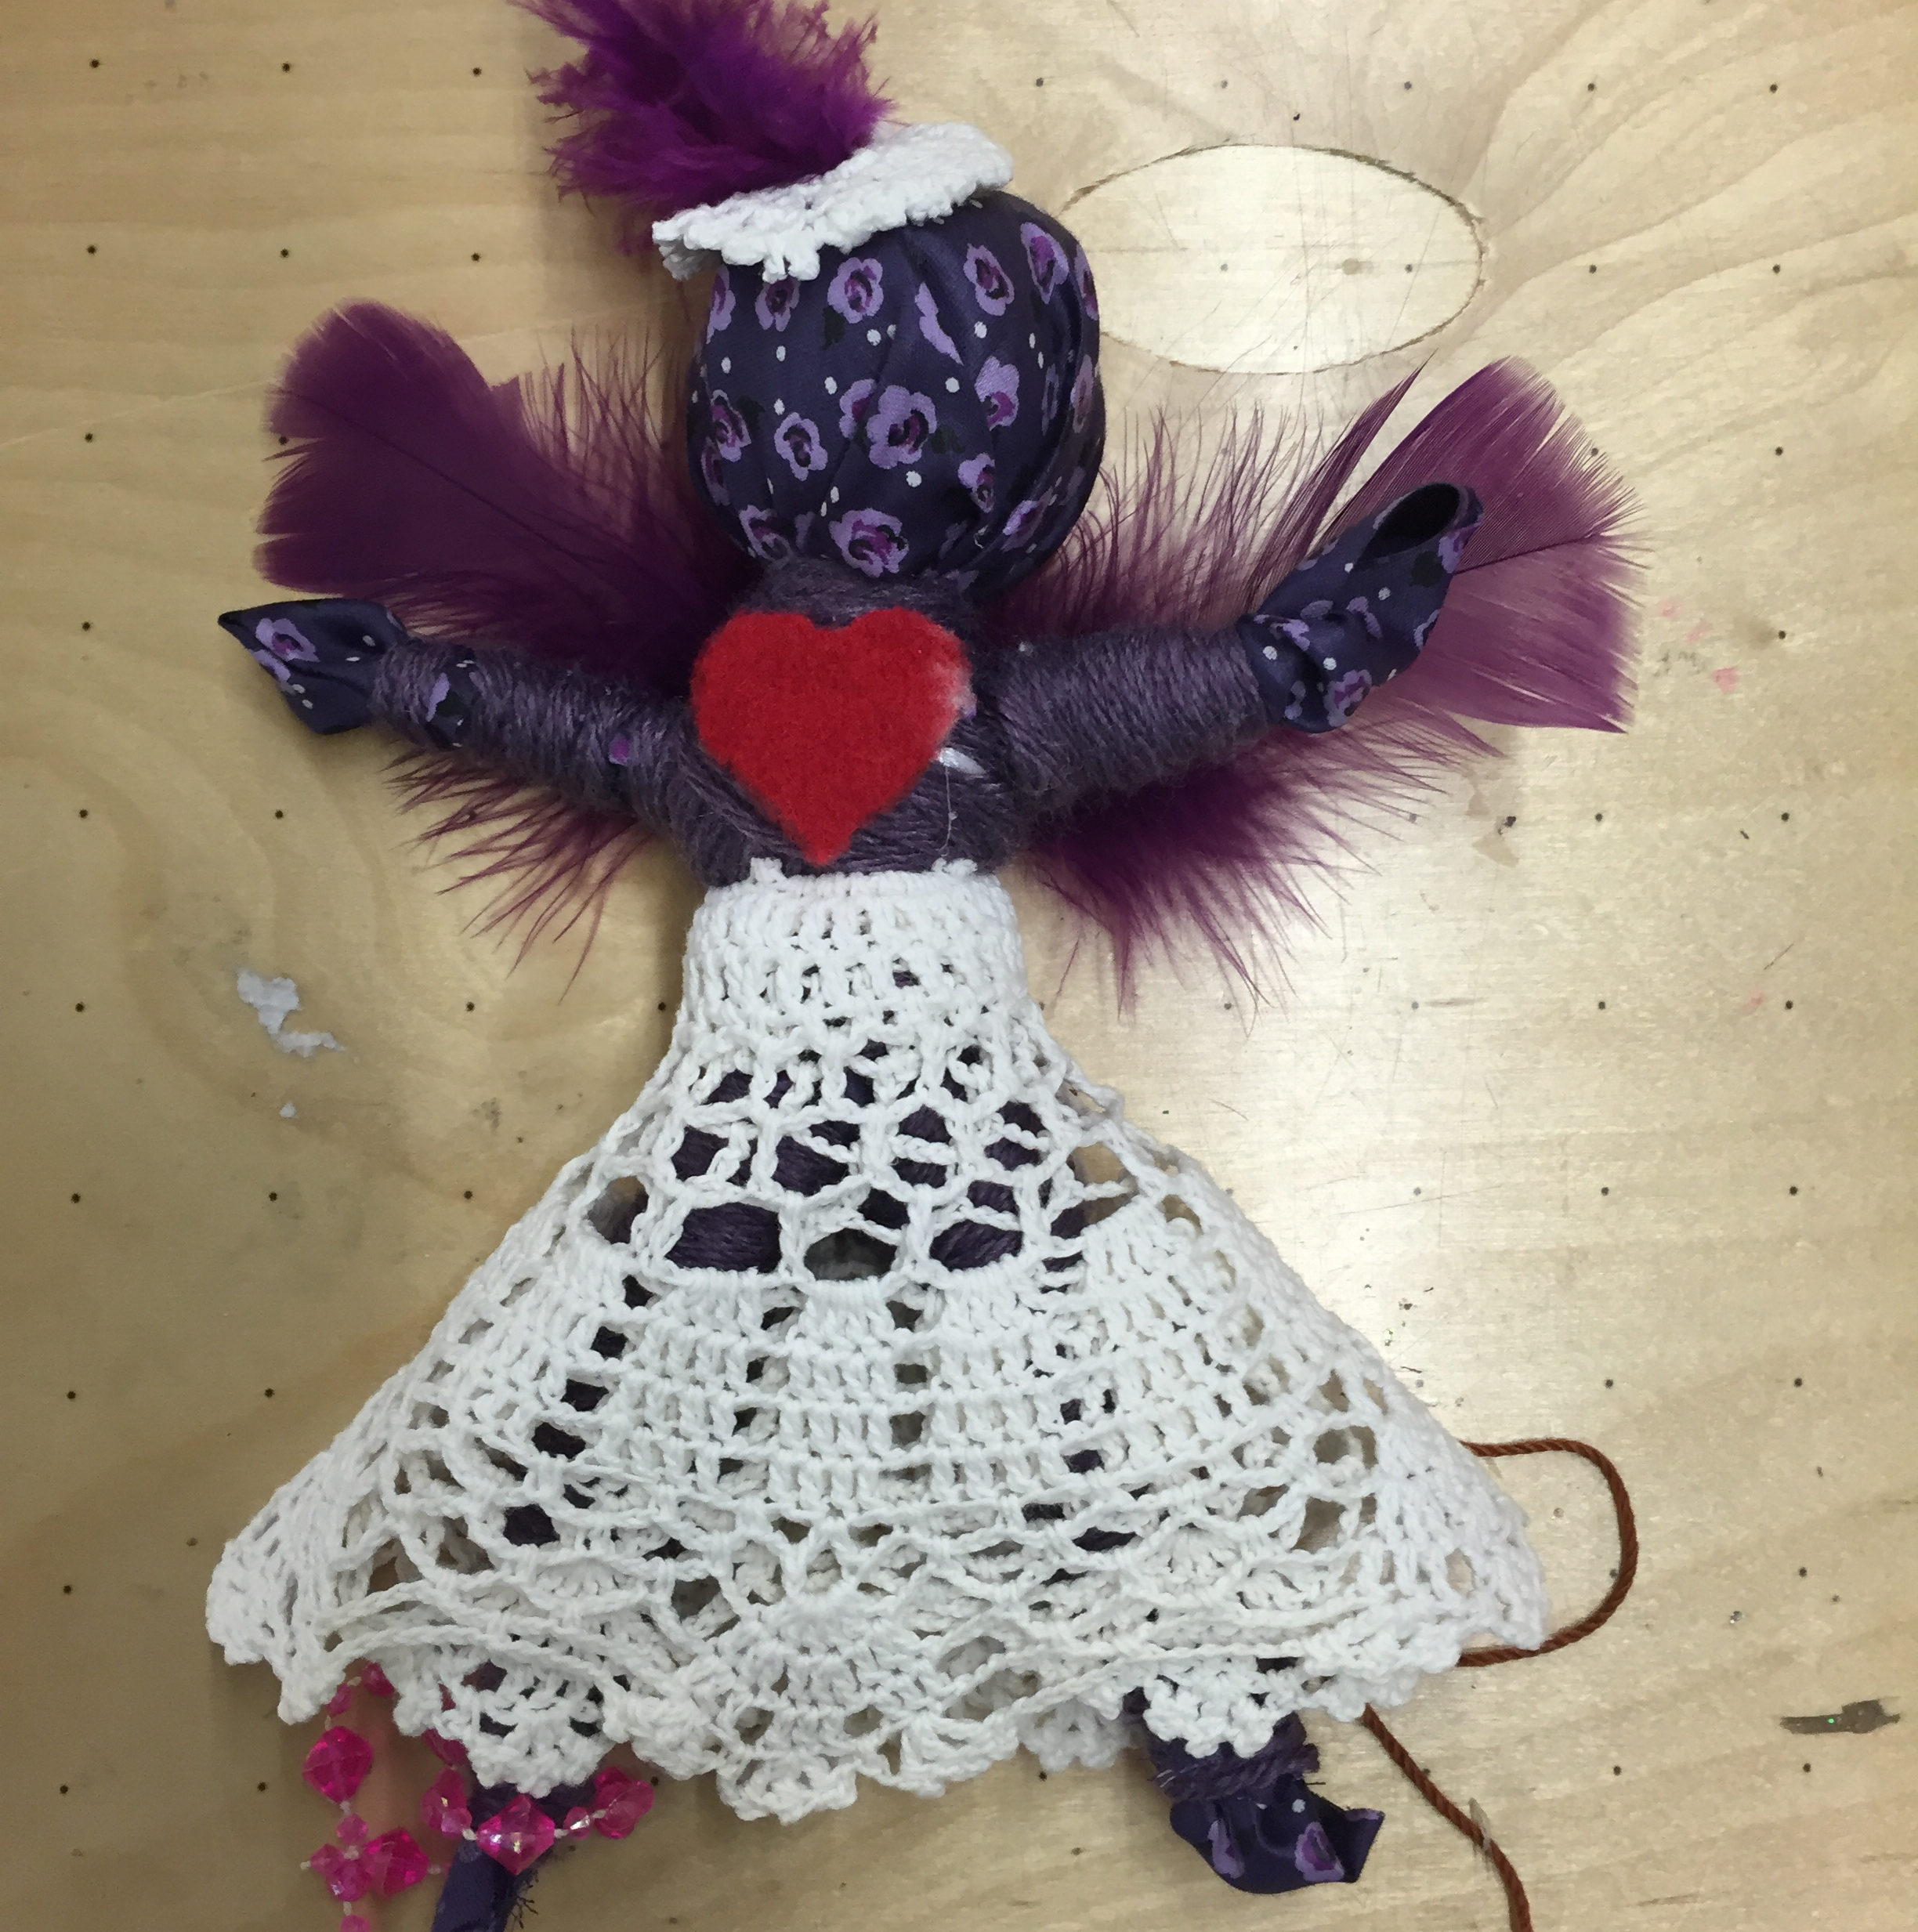 art therapy dolls